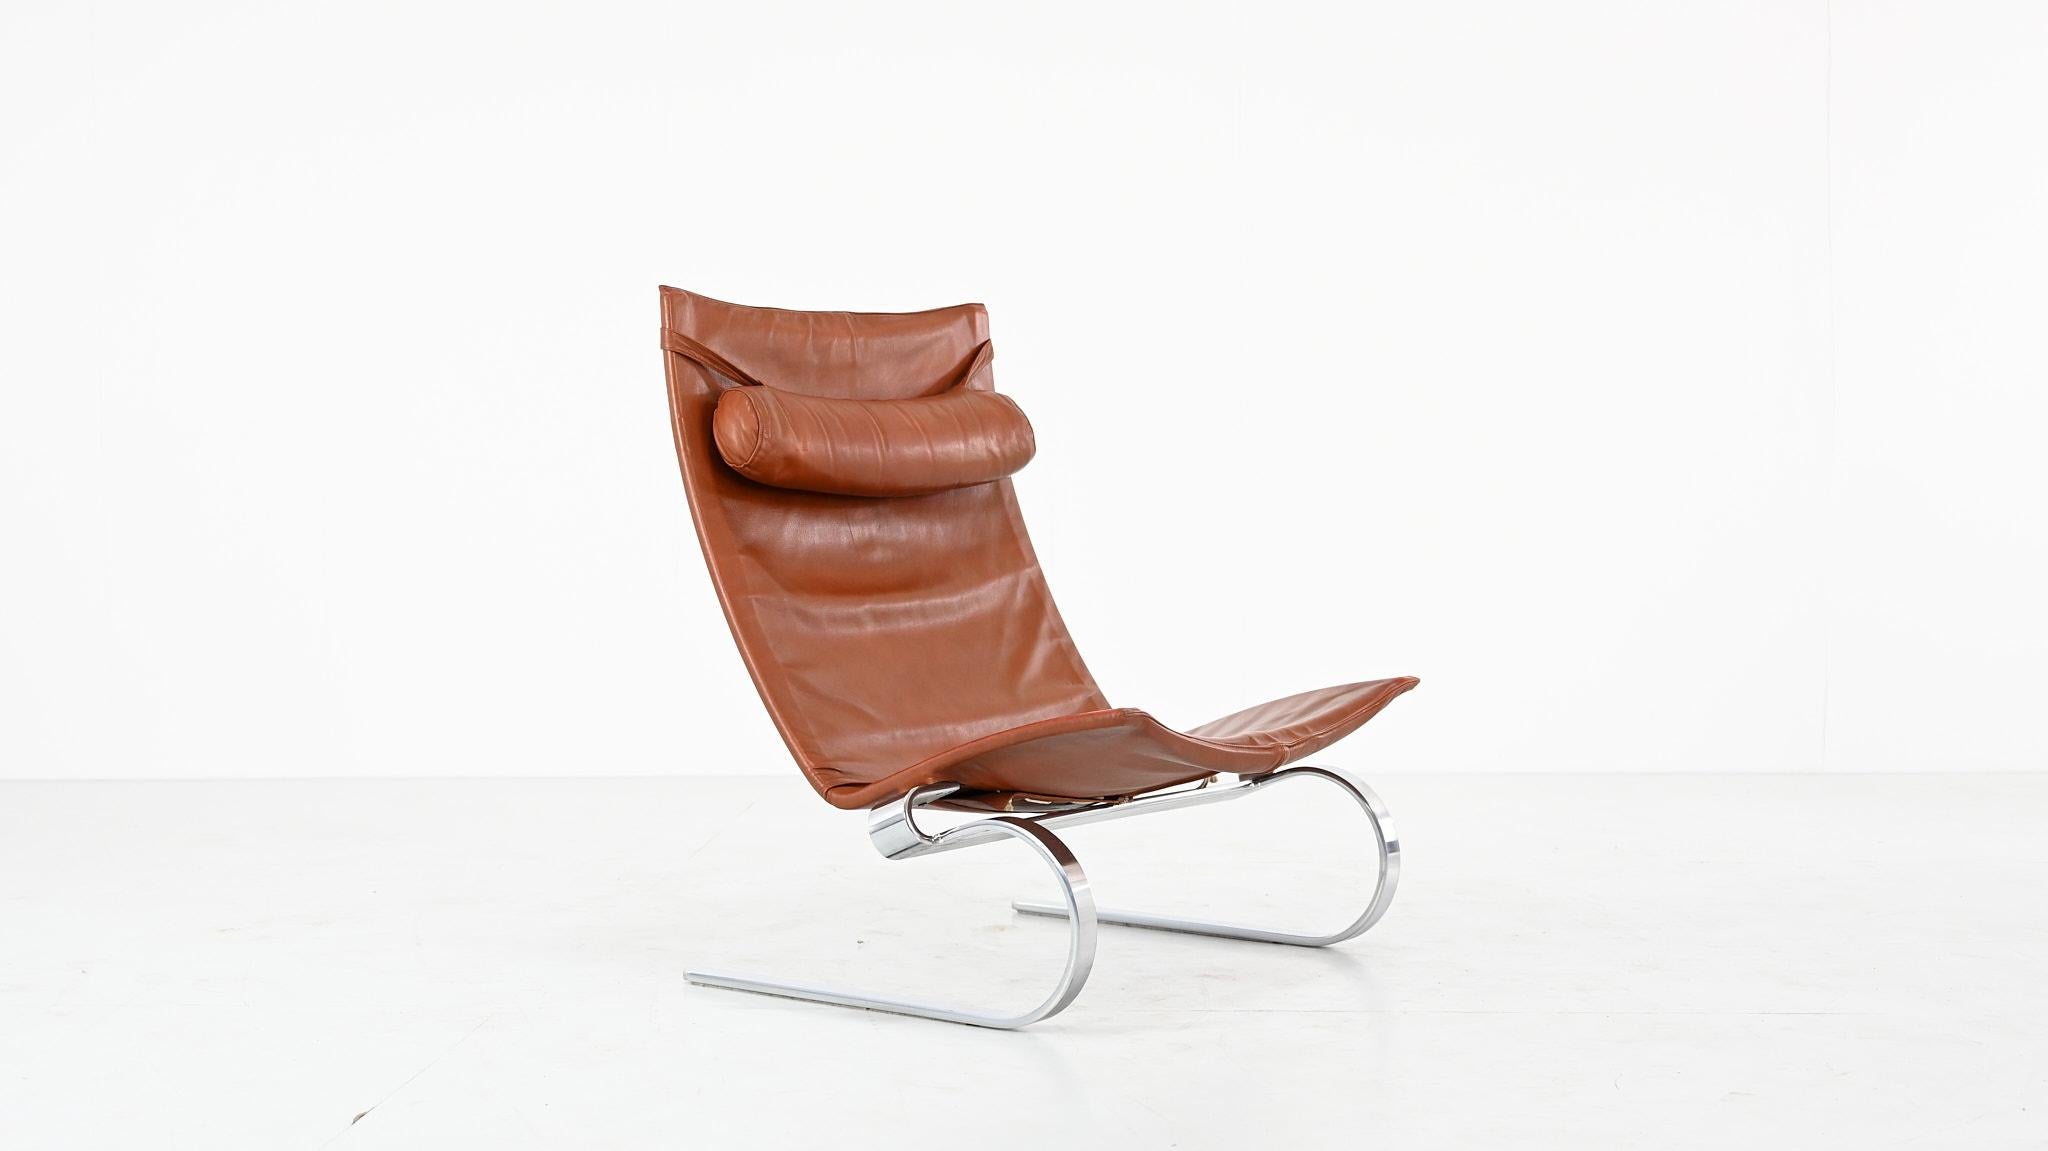 First edition of the PK20 lounge chair, a graceful, elegant masterpiece created in 1968 by Danish designer Poul Kjaerholm for Ejvind Kold Christensen. 

It consists of an aesthetic cantilever structure in mat chromed steel with leather seat and